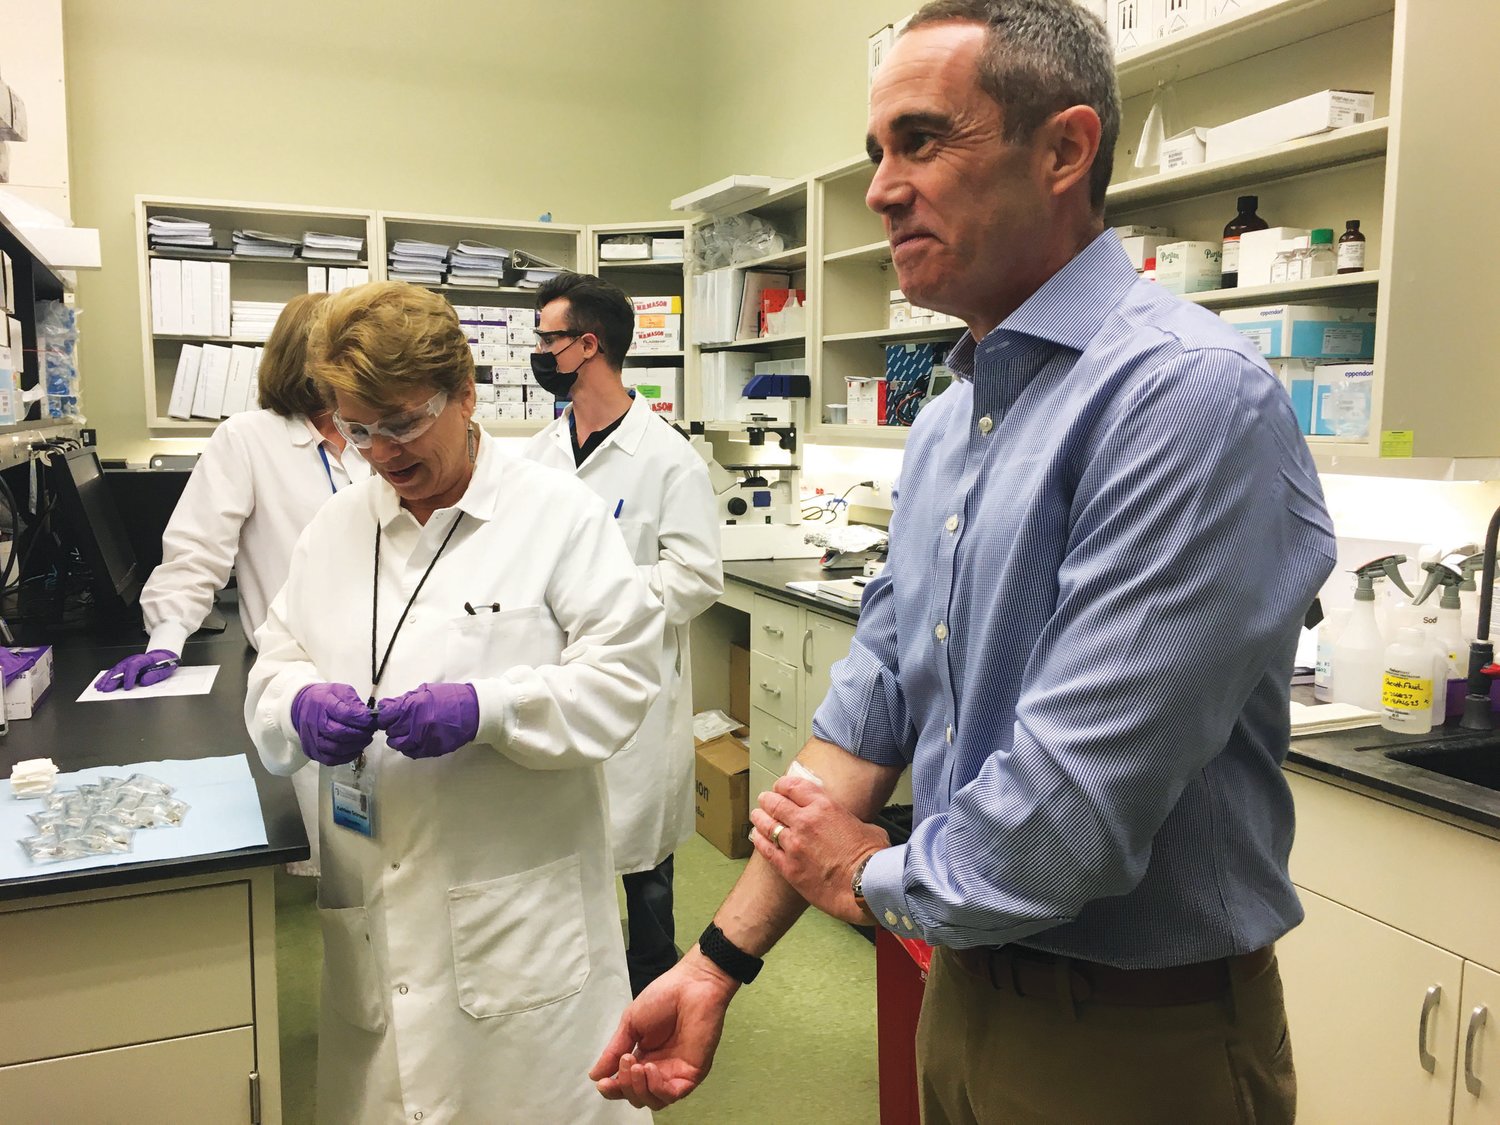 State Sen. Steve Santarsiero receives a new test that measures the level of antibodies to COVID-19. The test – VaxEffect – was developed by FlowMetric at the Bucks County Biotechnology Center in Buckingham Township.